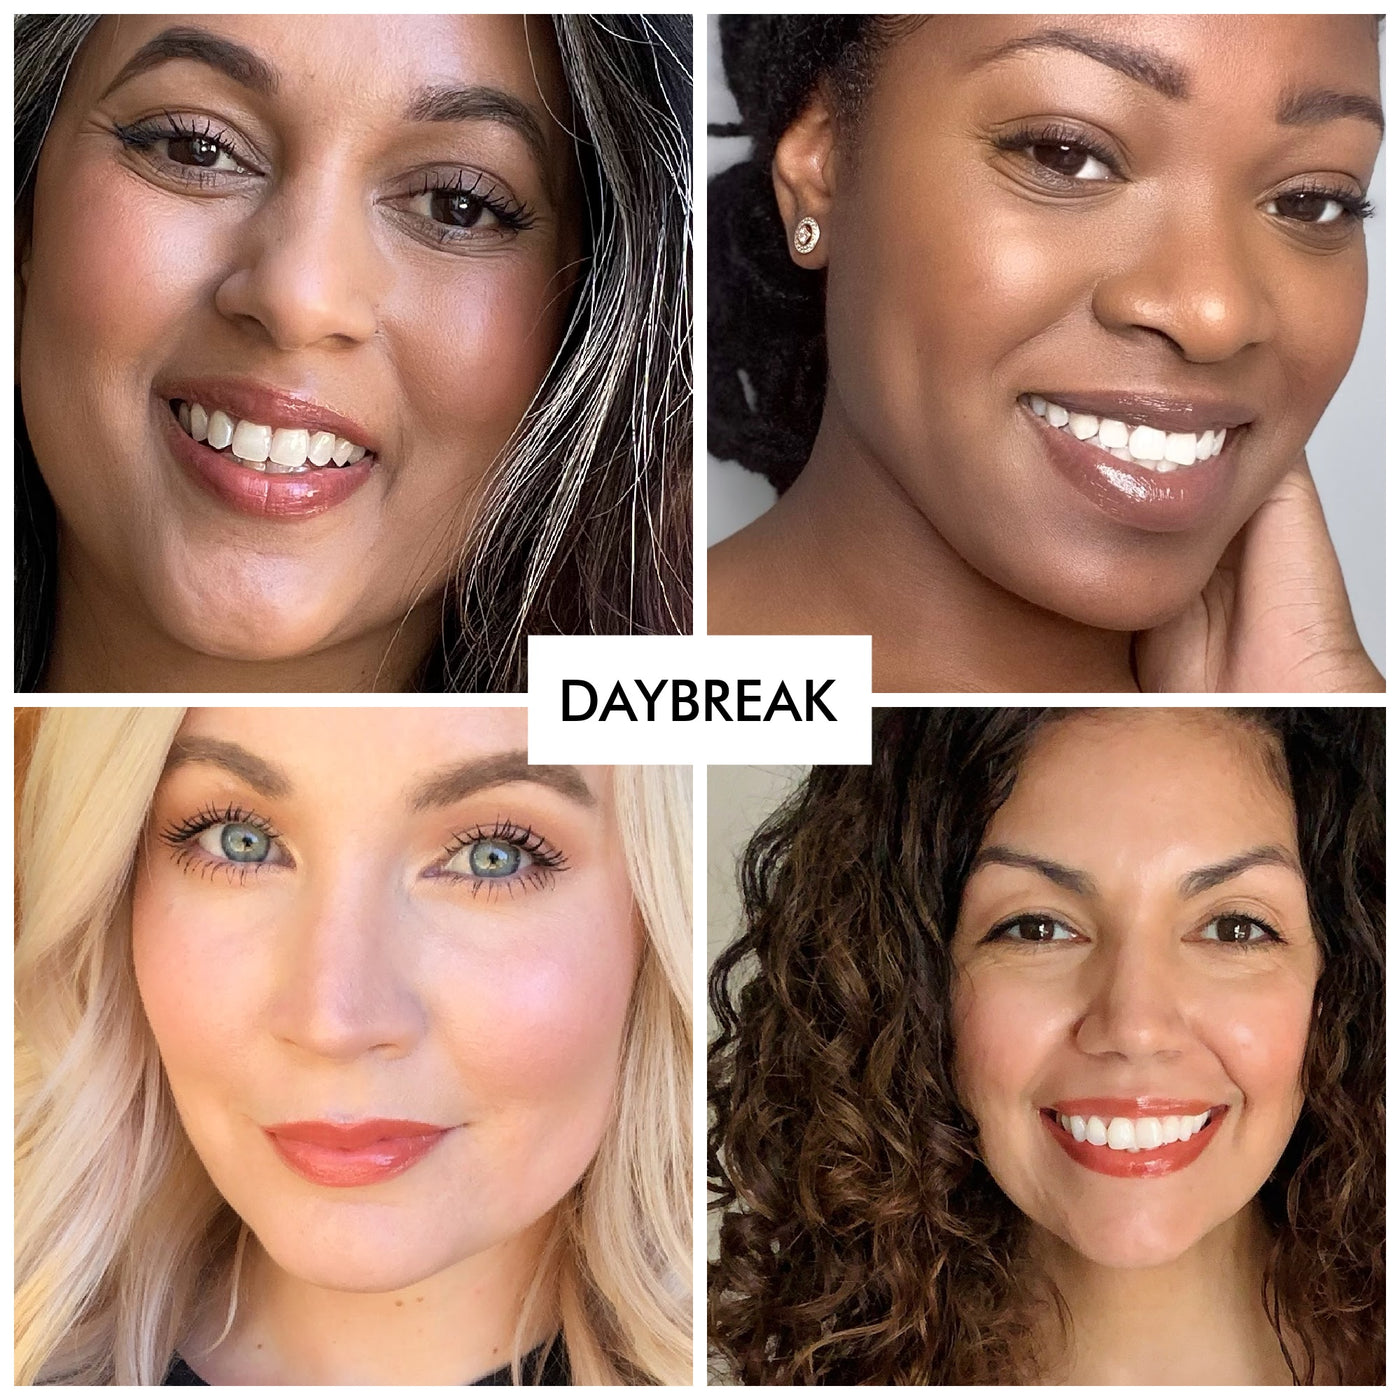 4 women of various skintones wearing the fruit smoothie lip gloss shade from erin's faces of daybreak